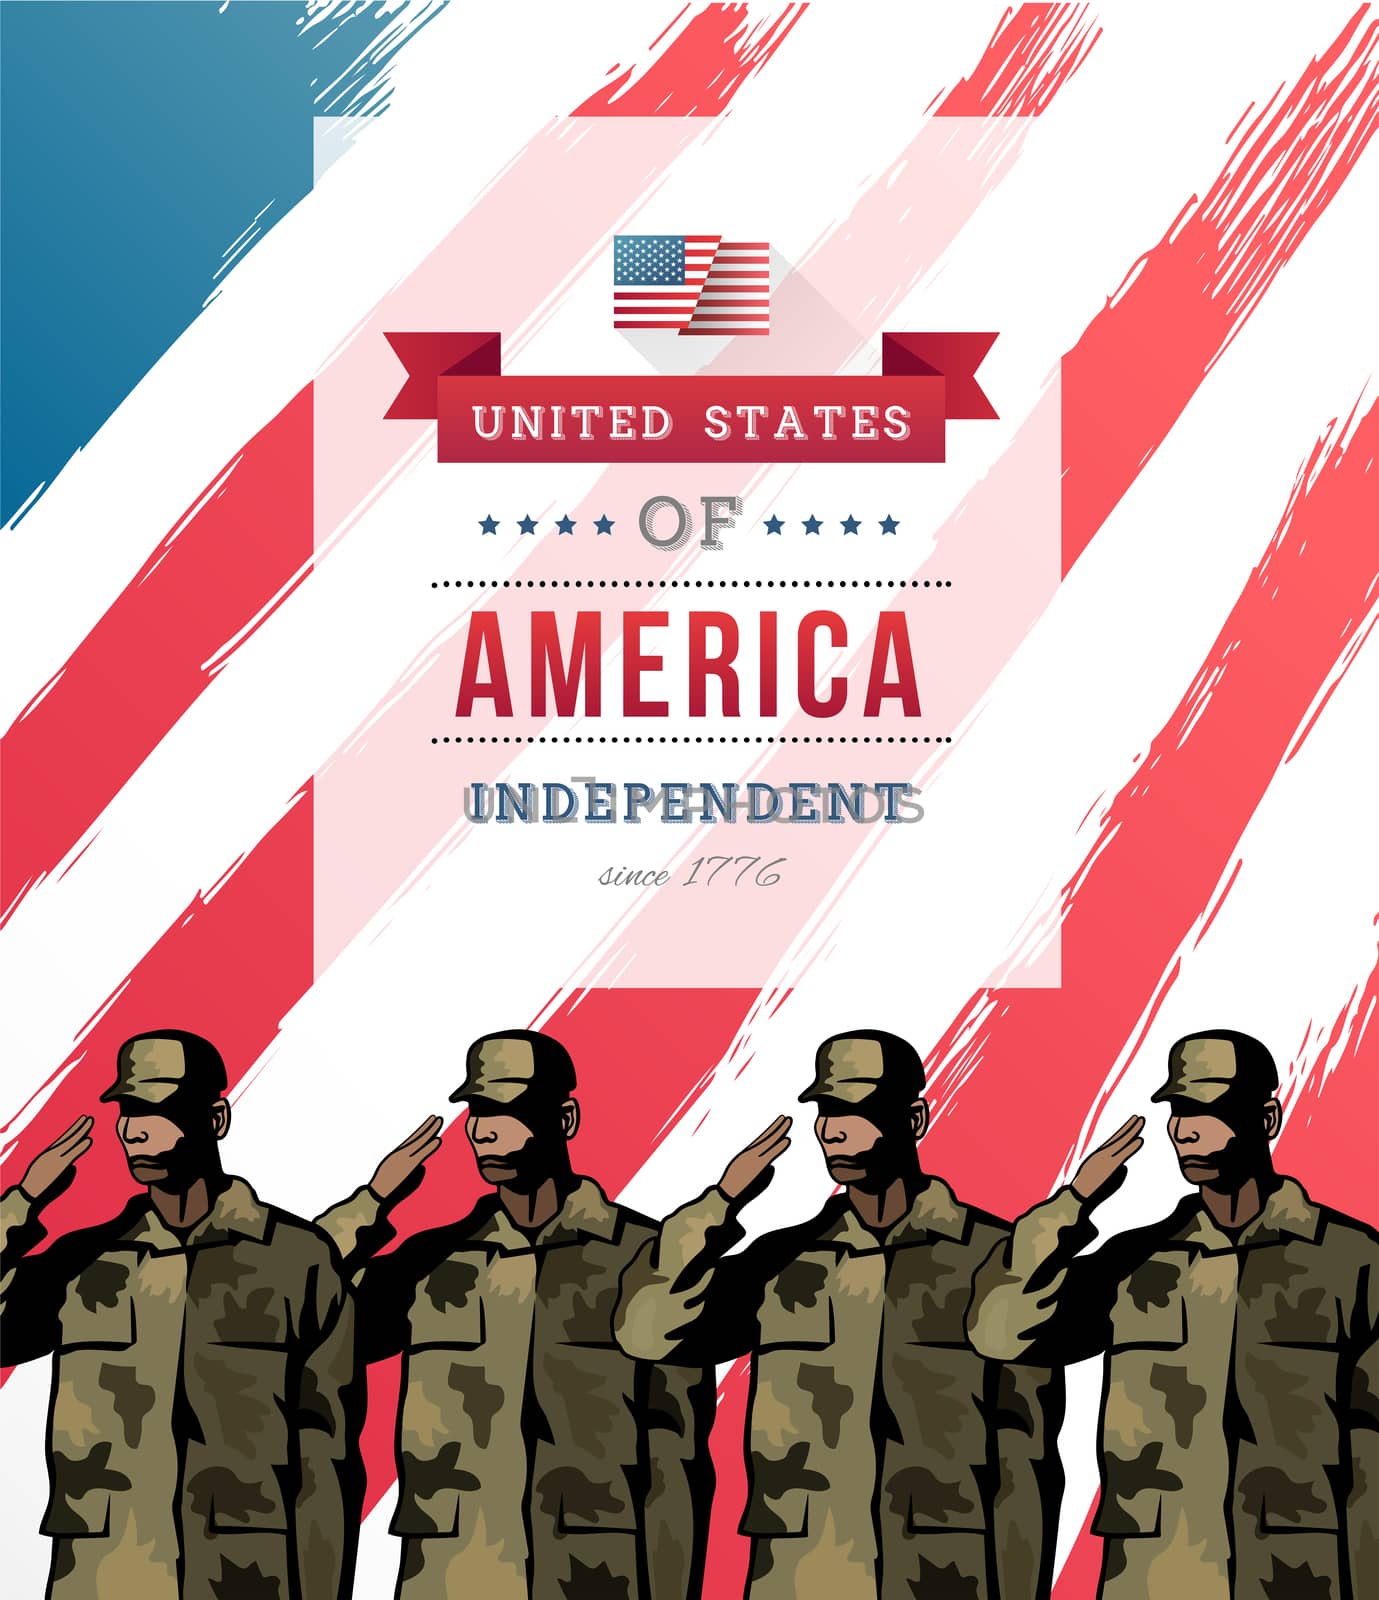 Independence day concept vector by Wavebreakmedia